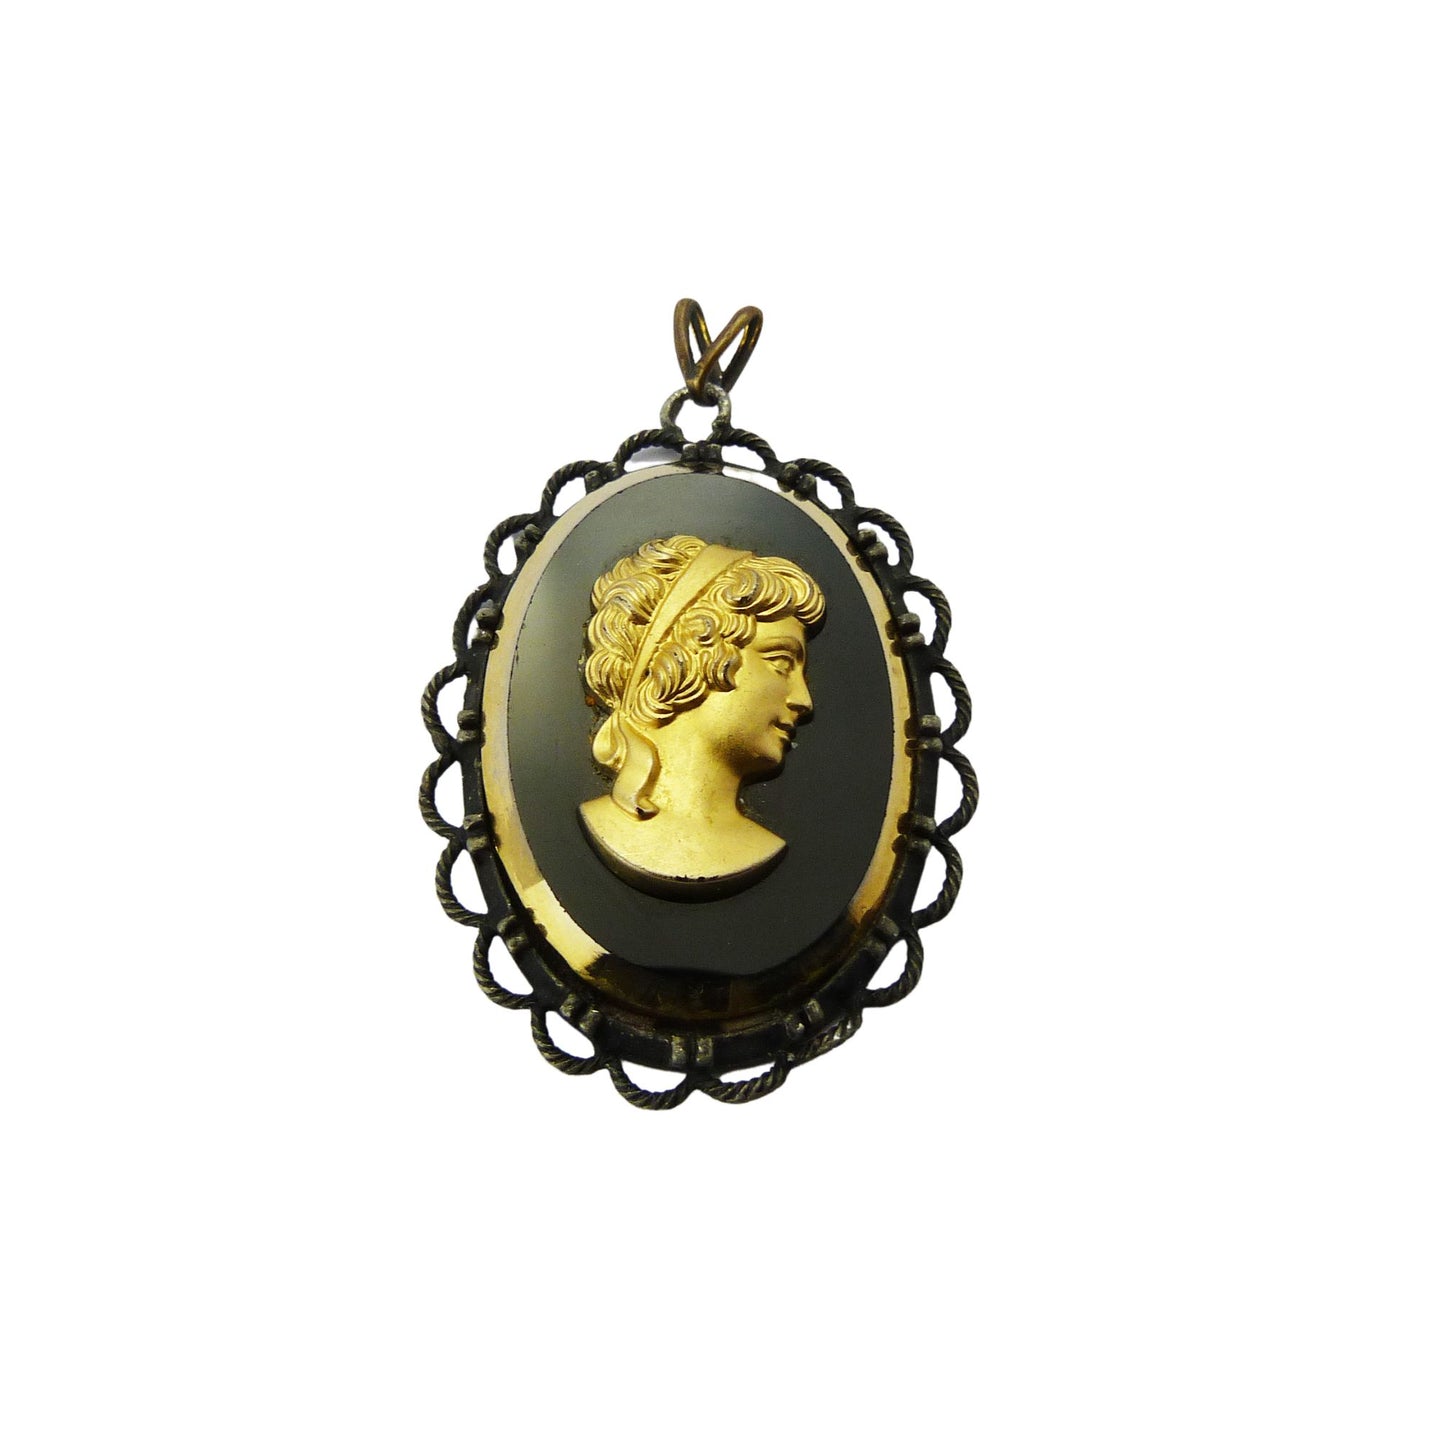 Vintage Black & Gold Glass Cameo Pendant Signed Exquisite